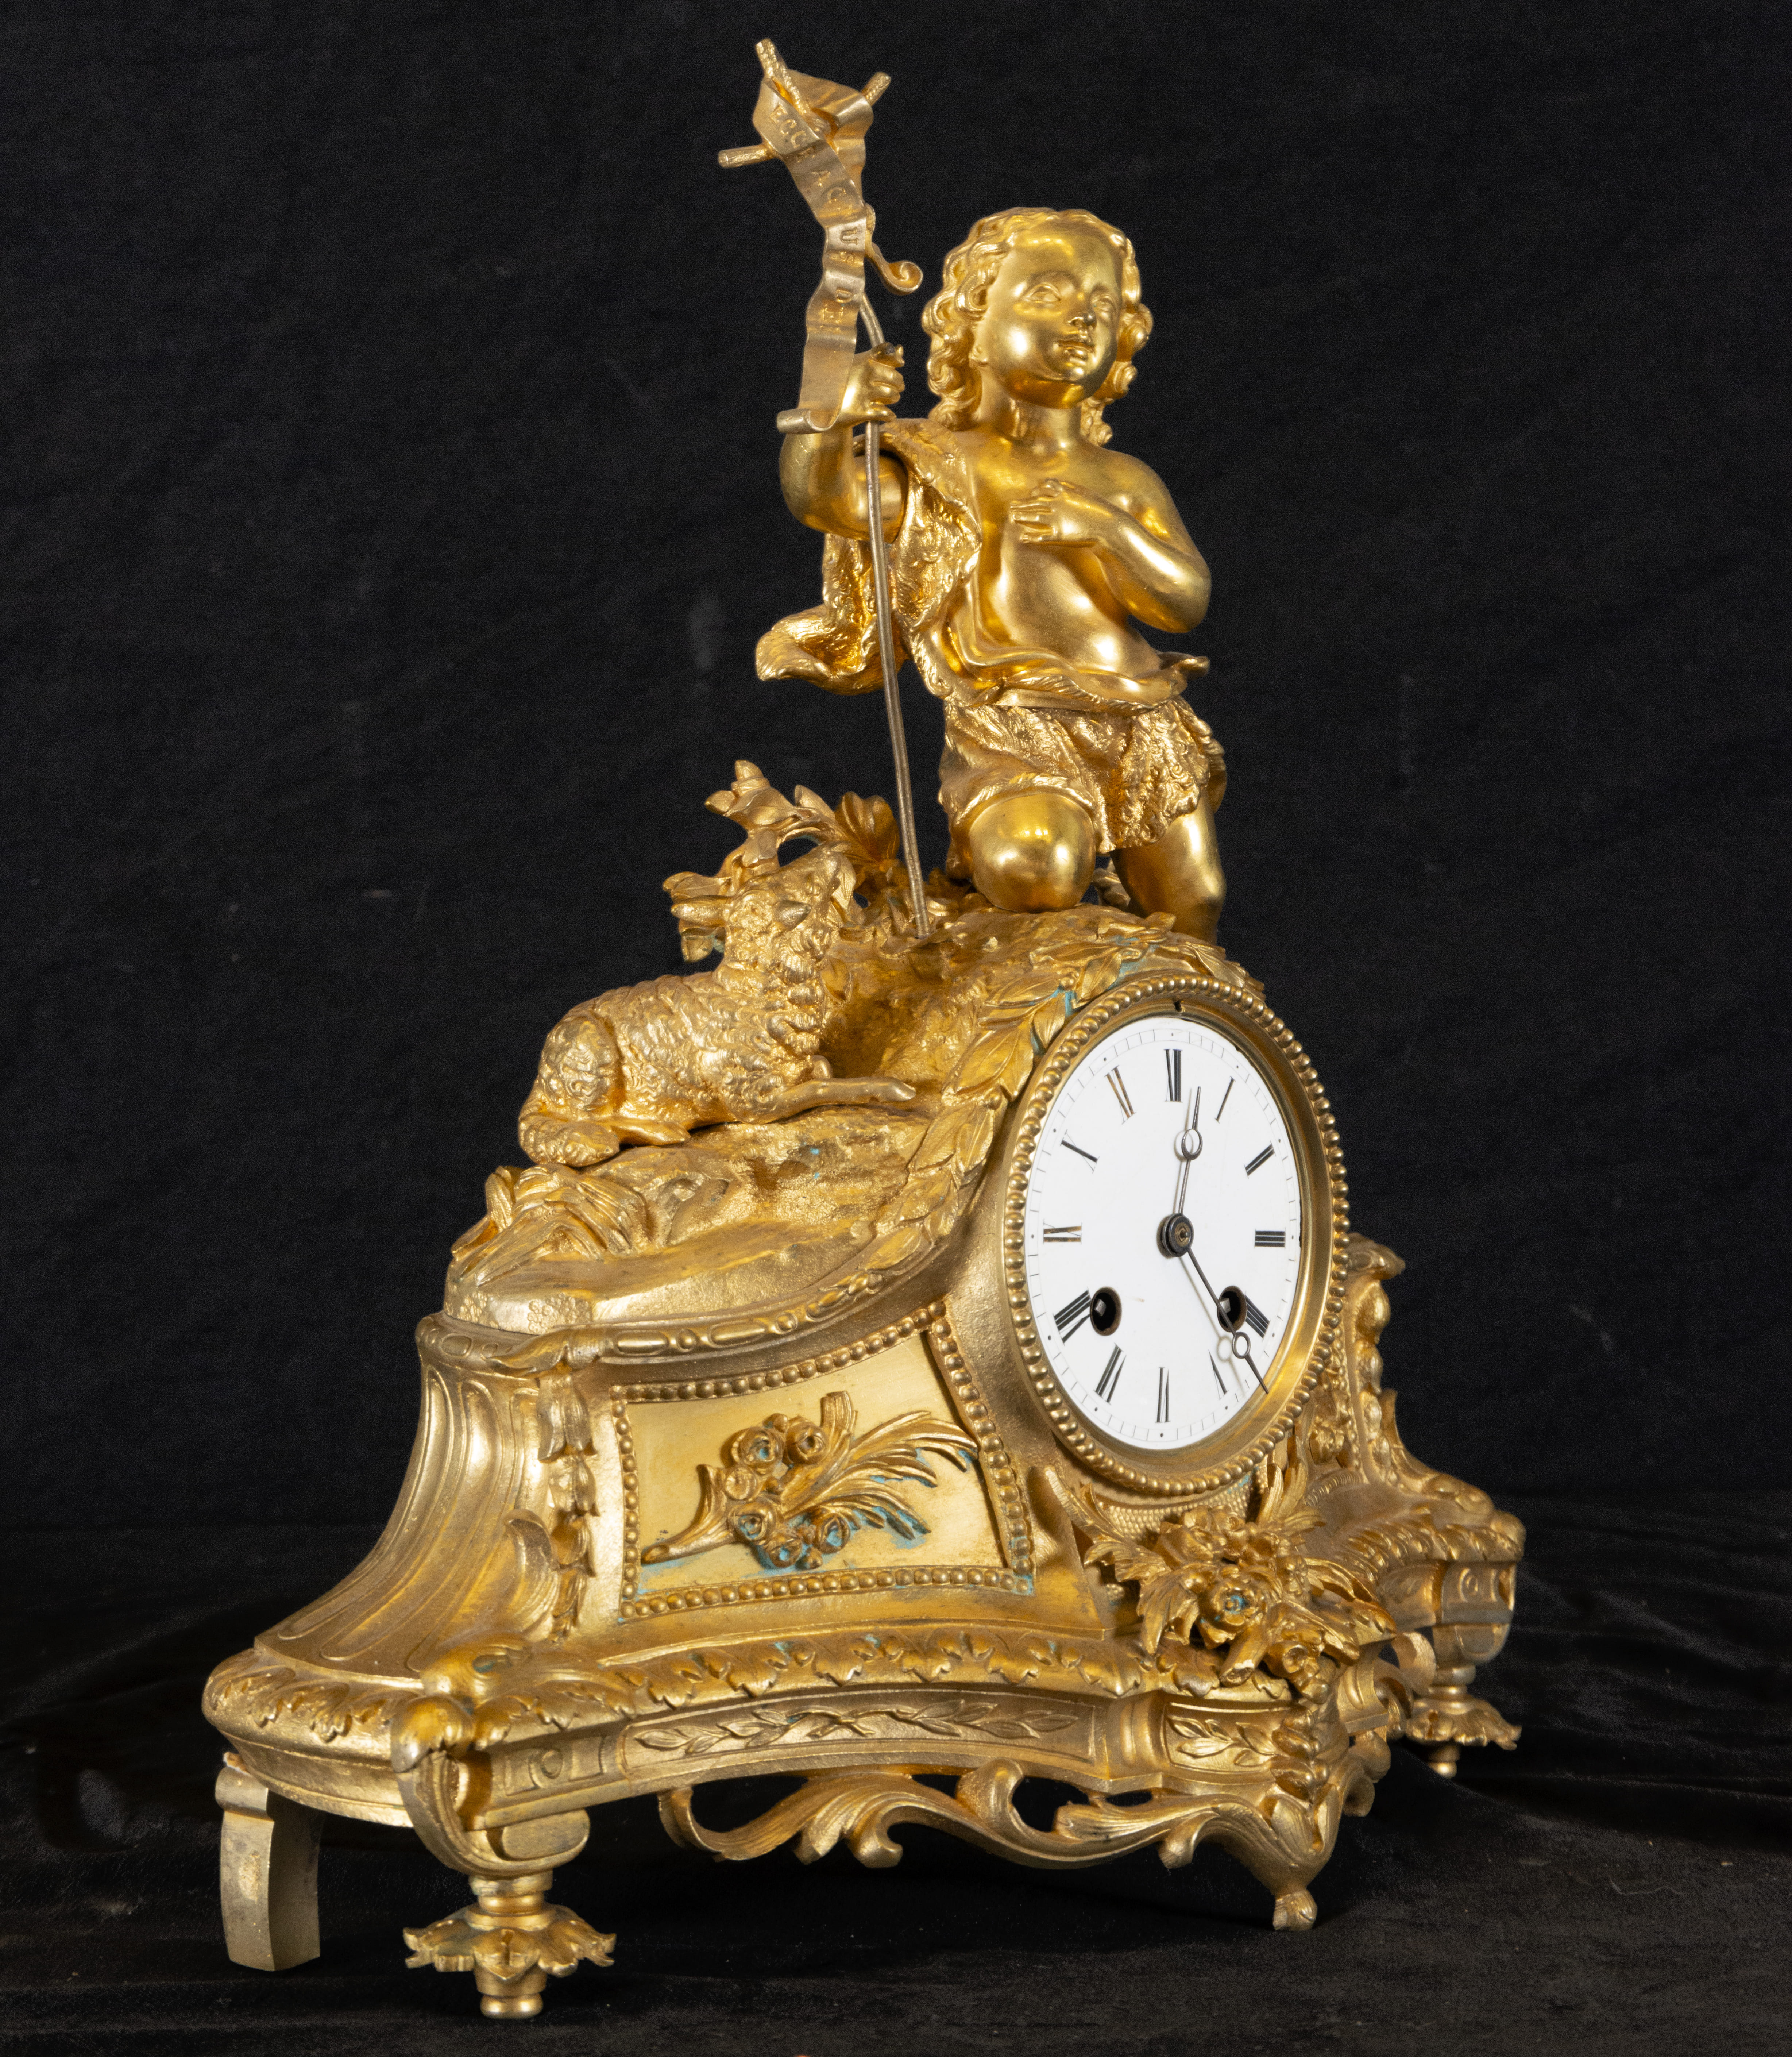 Complete French garrison in mercury gilt bronze in Louis XV style, 19th century French work - Image 6 of 7